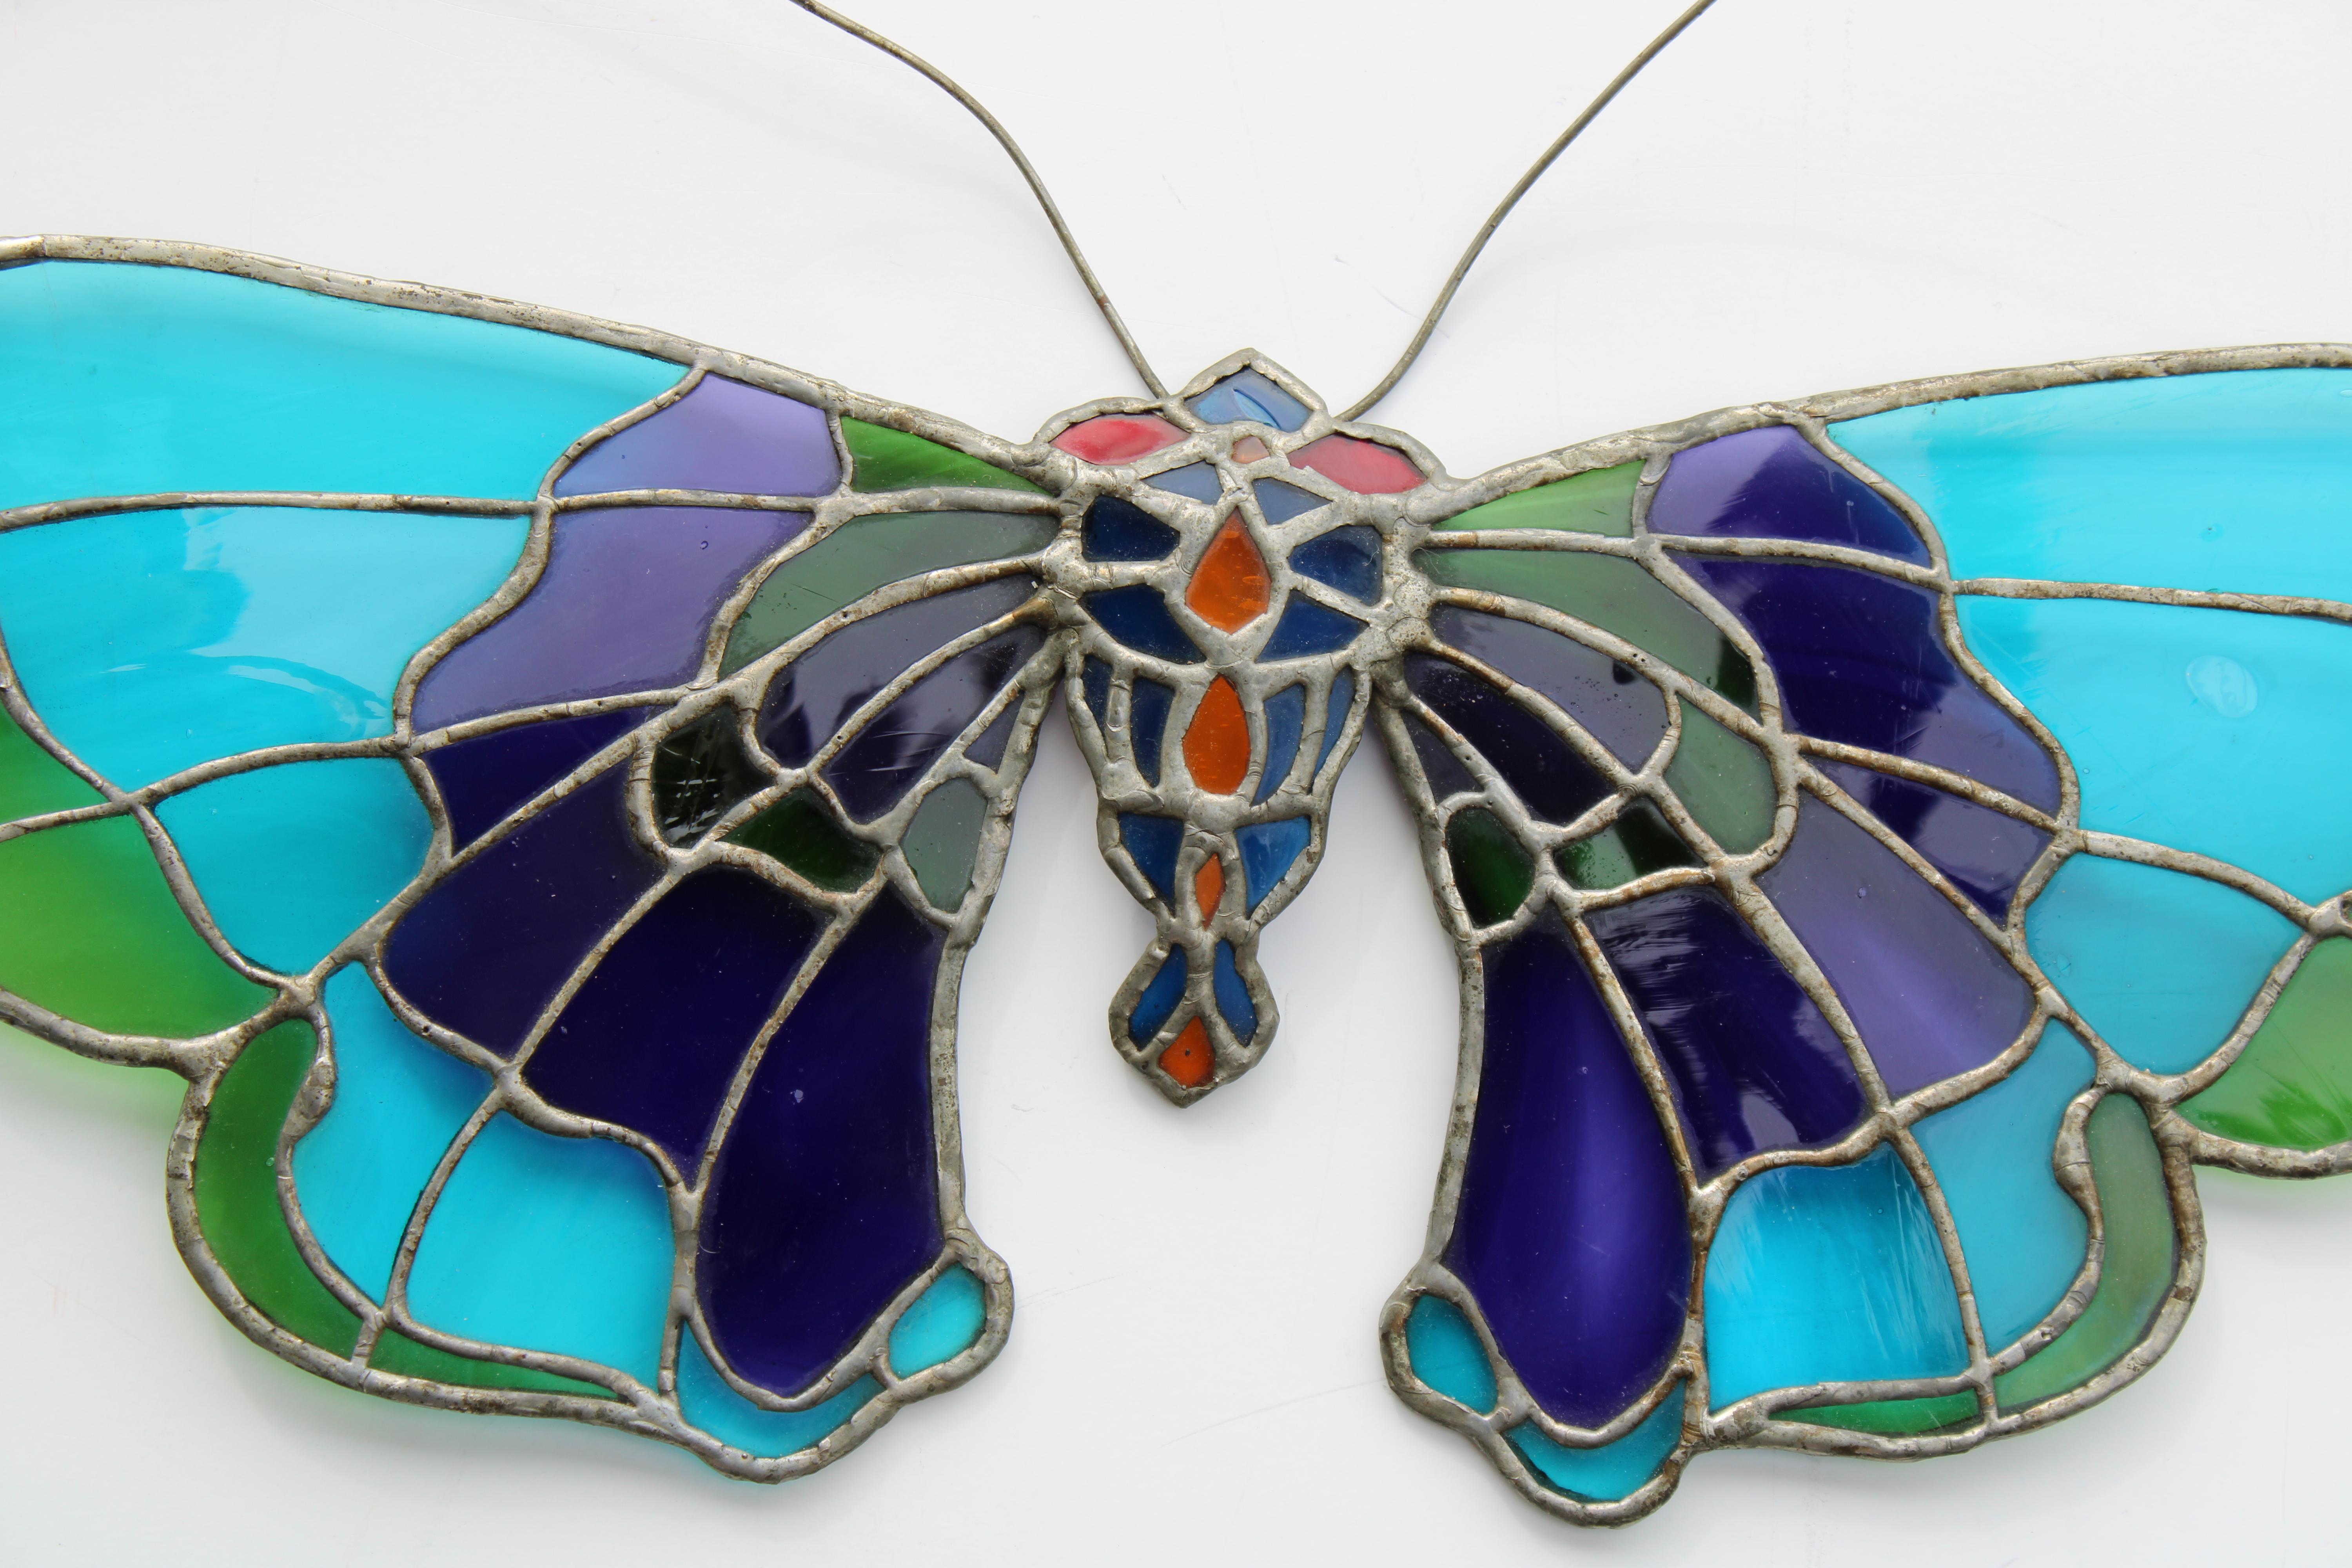 Stain glass butterfly by a New York City artist named Gilly.  I knew Gilly back in the 1970s and opened a store very briefly in the village called Gilly Glass. 
 Butterfly measures 23.5